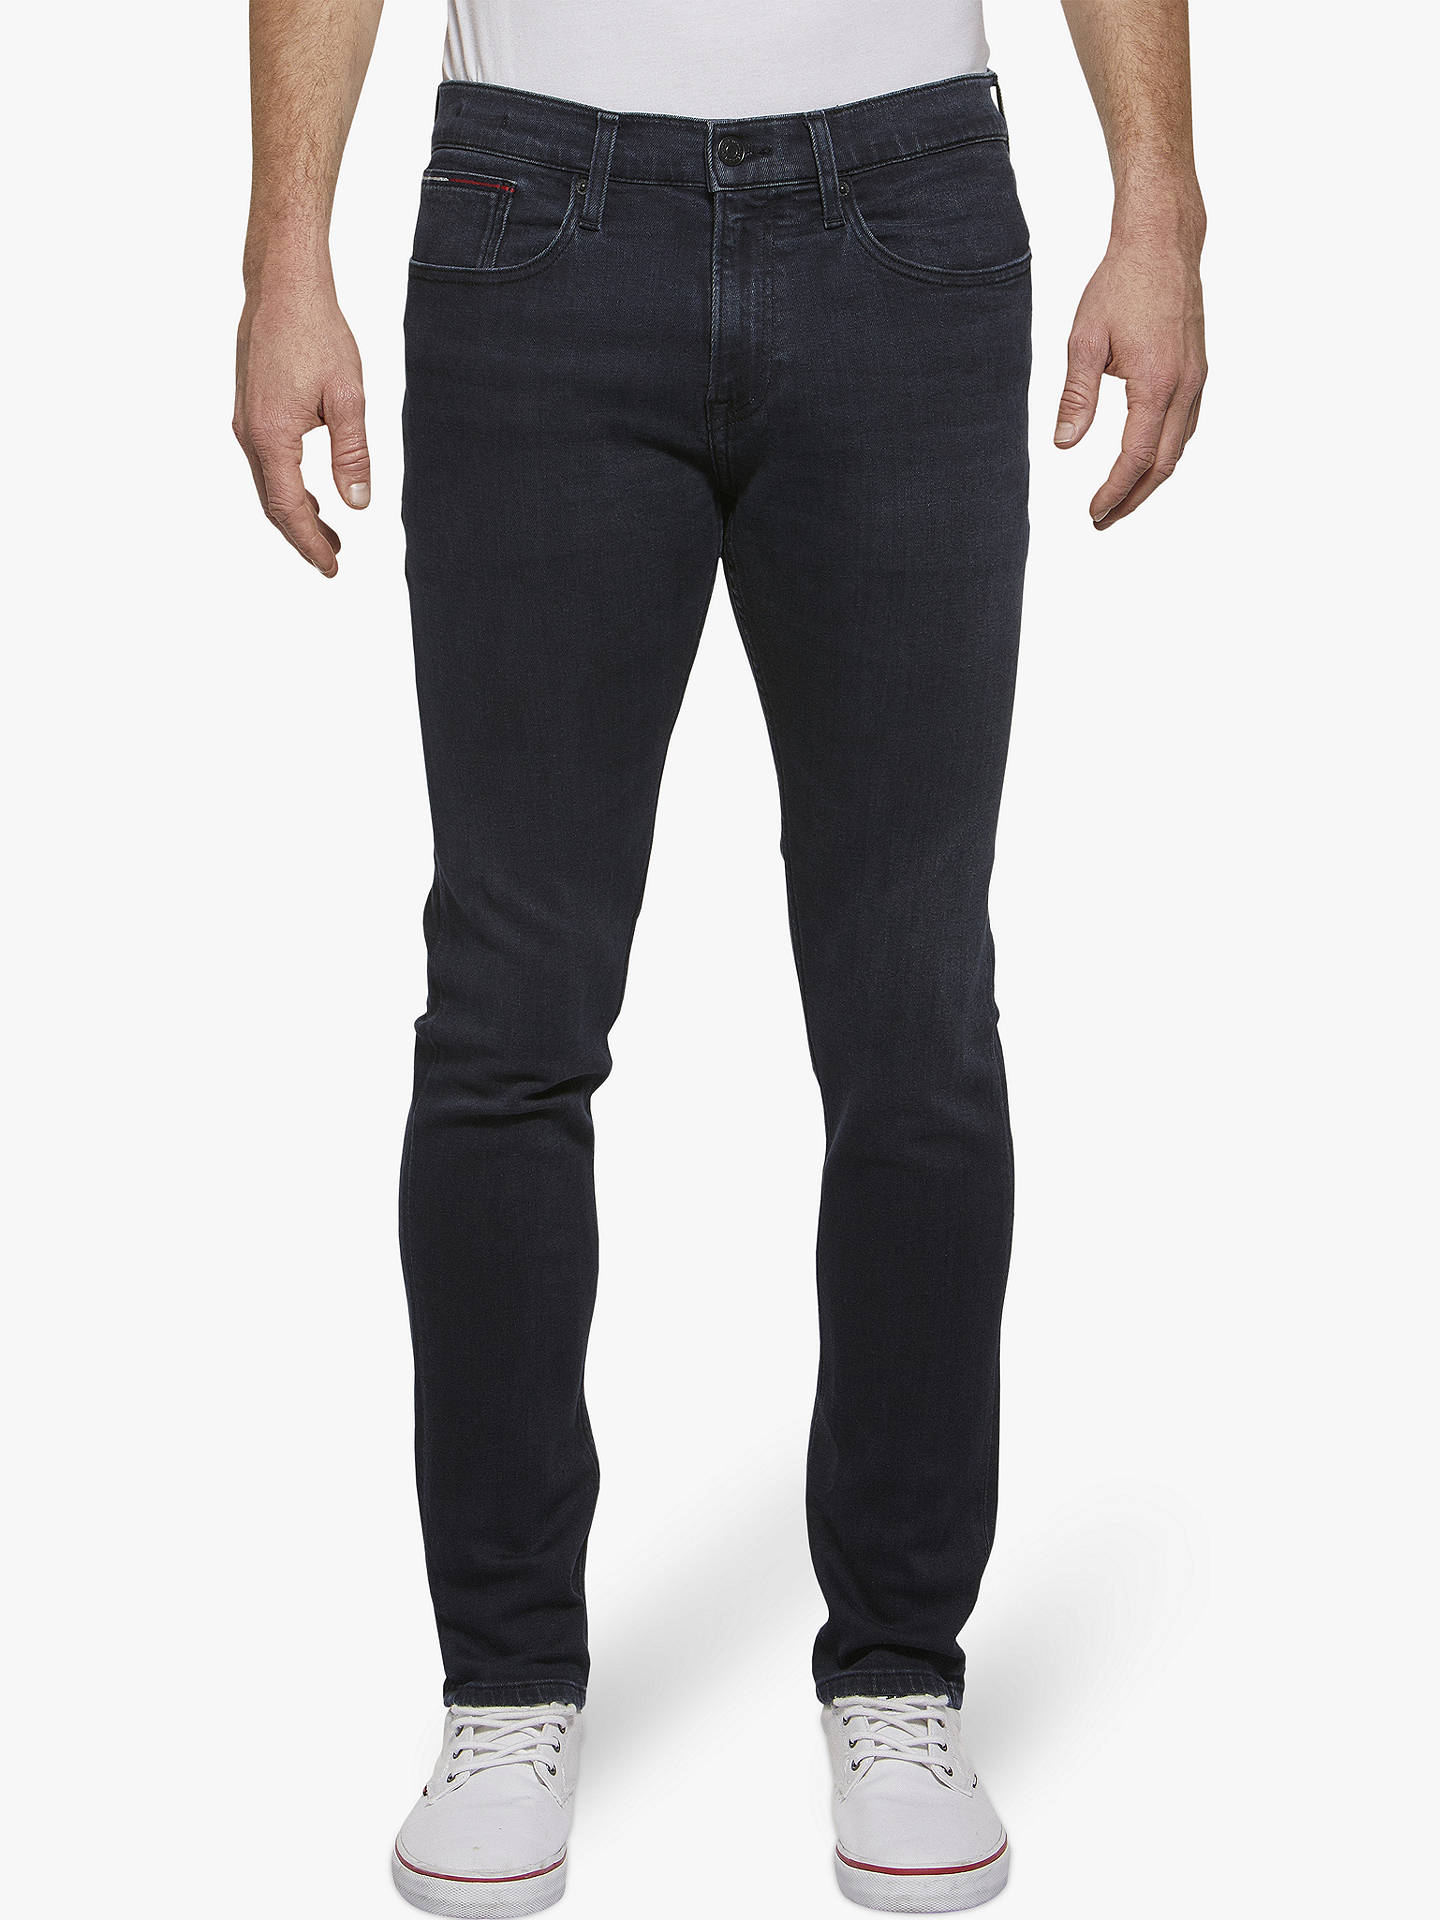 Tommy Jeans Slim Tapered Steve Jeans, Marina Blue at John Lewis & Partners